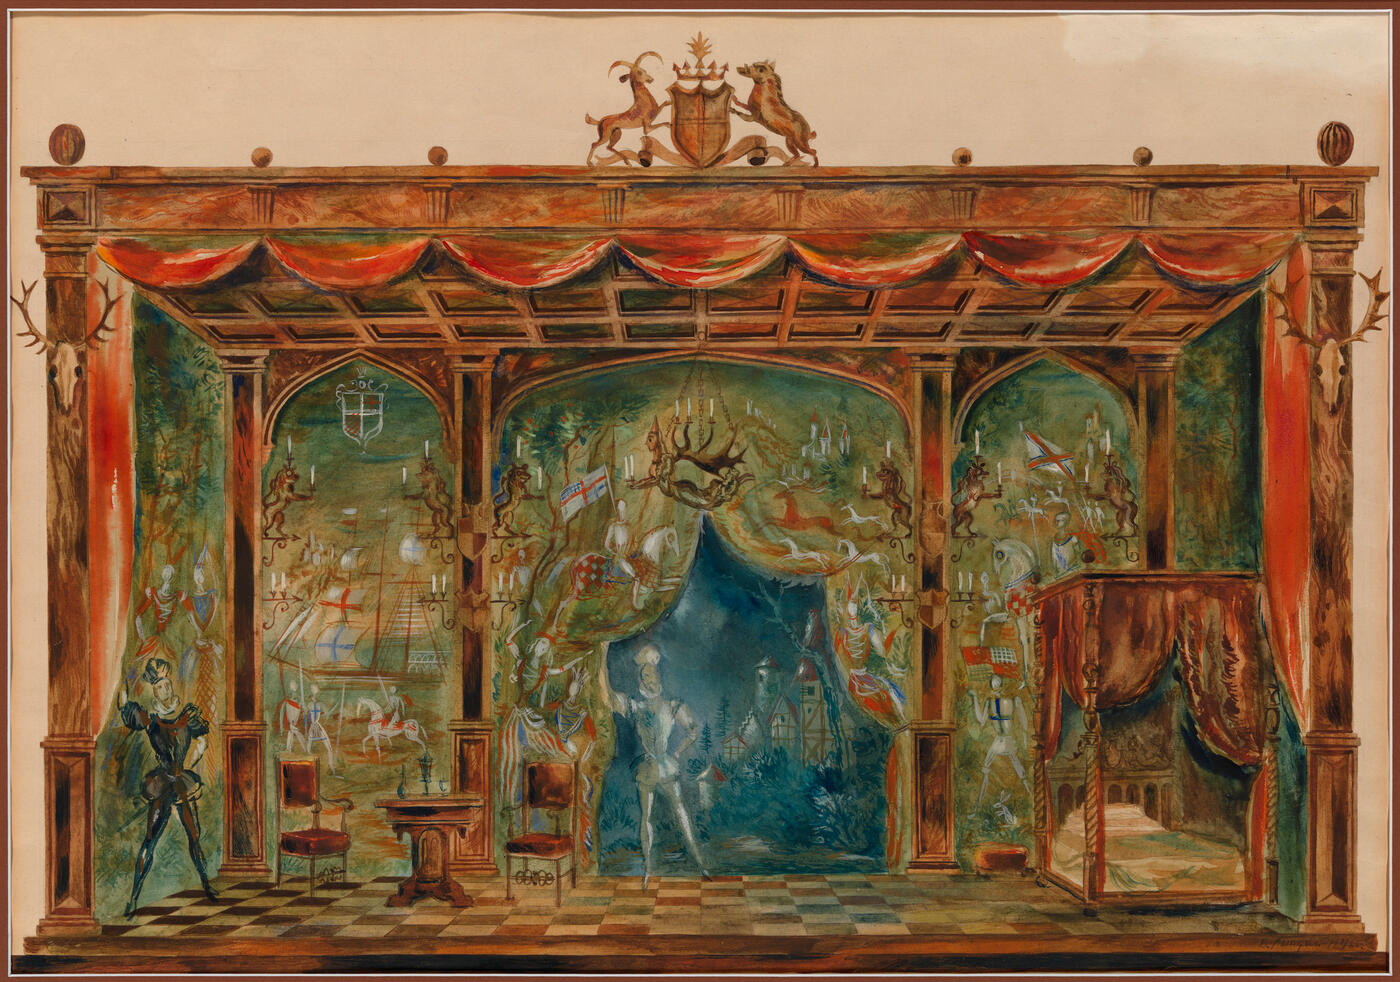 Set Design for "The Taming of the Shrew"